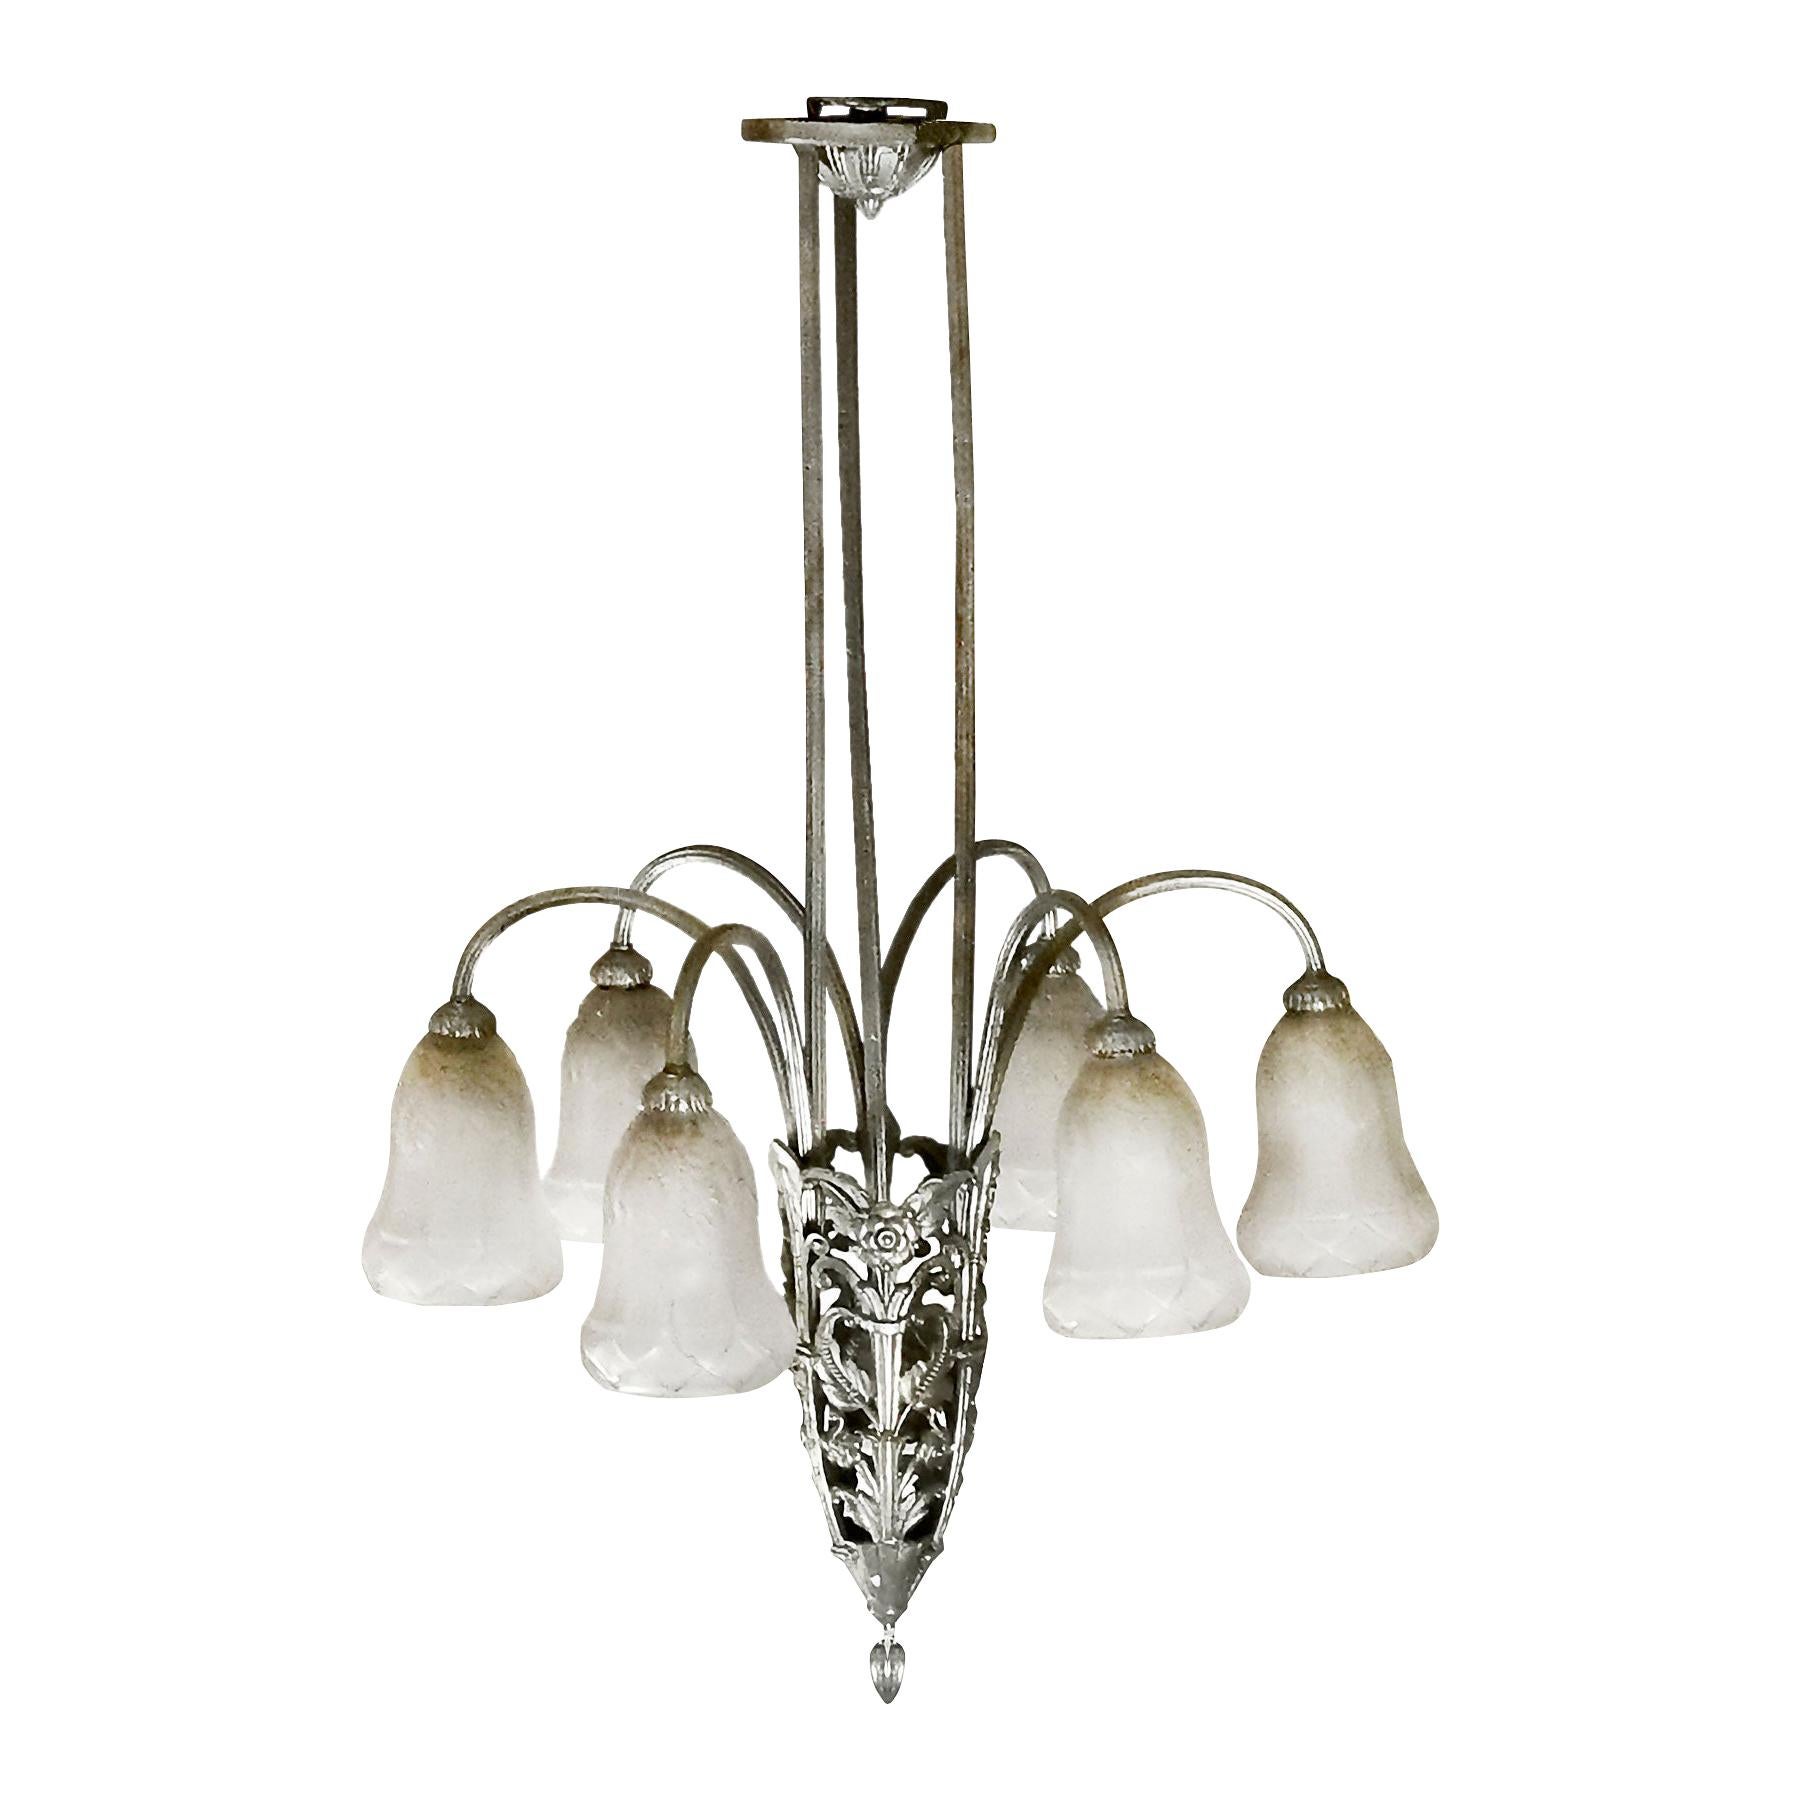 1930s Art Deco Chandelier, Six Branches, Silvered Bronze, Glass - France